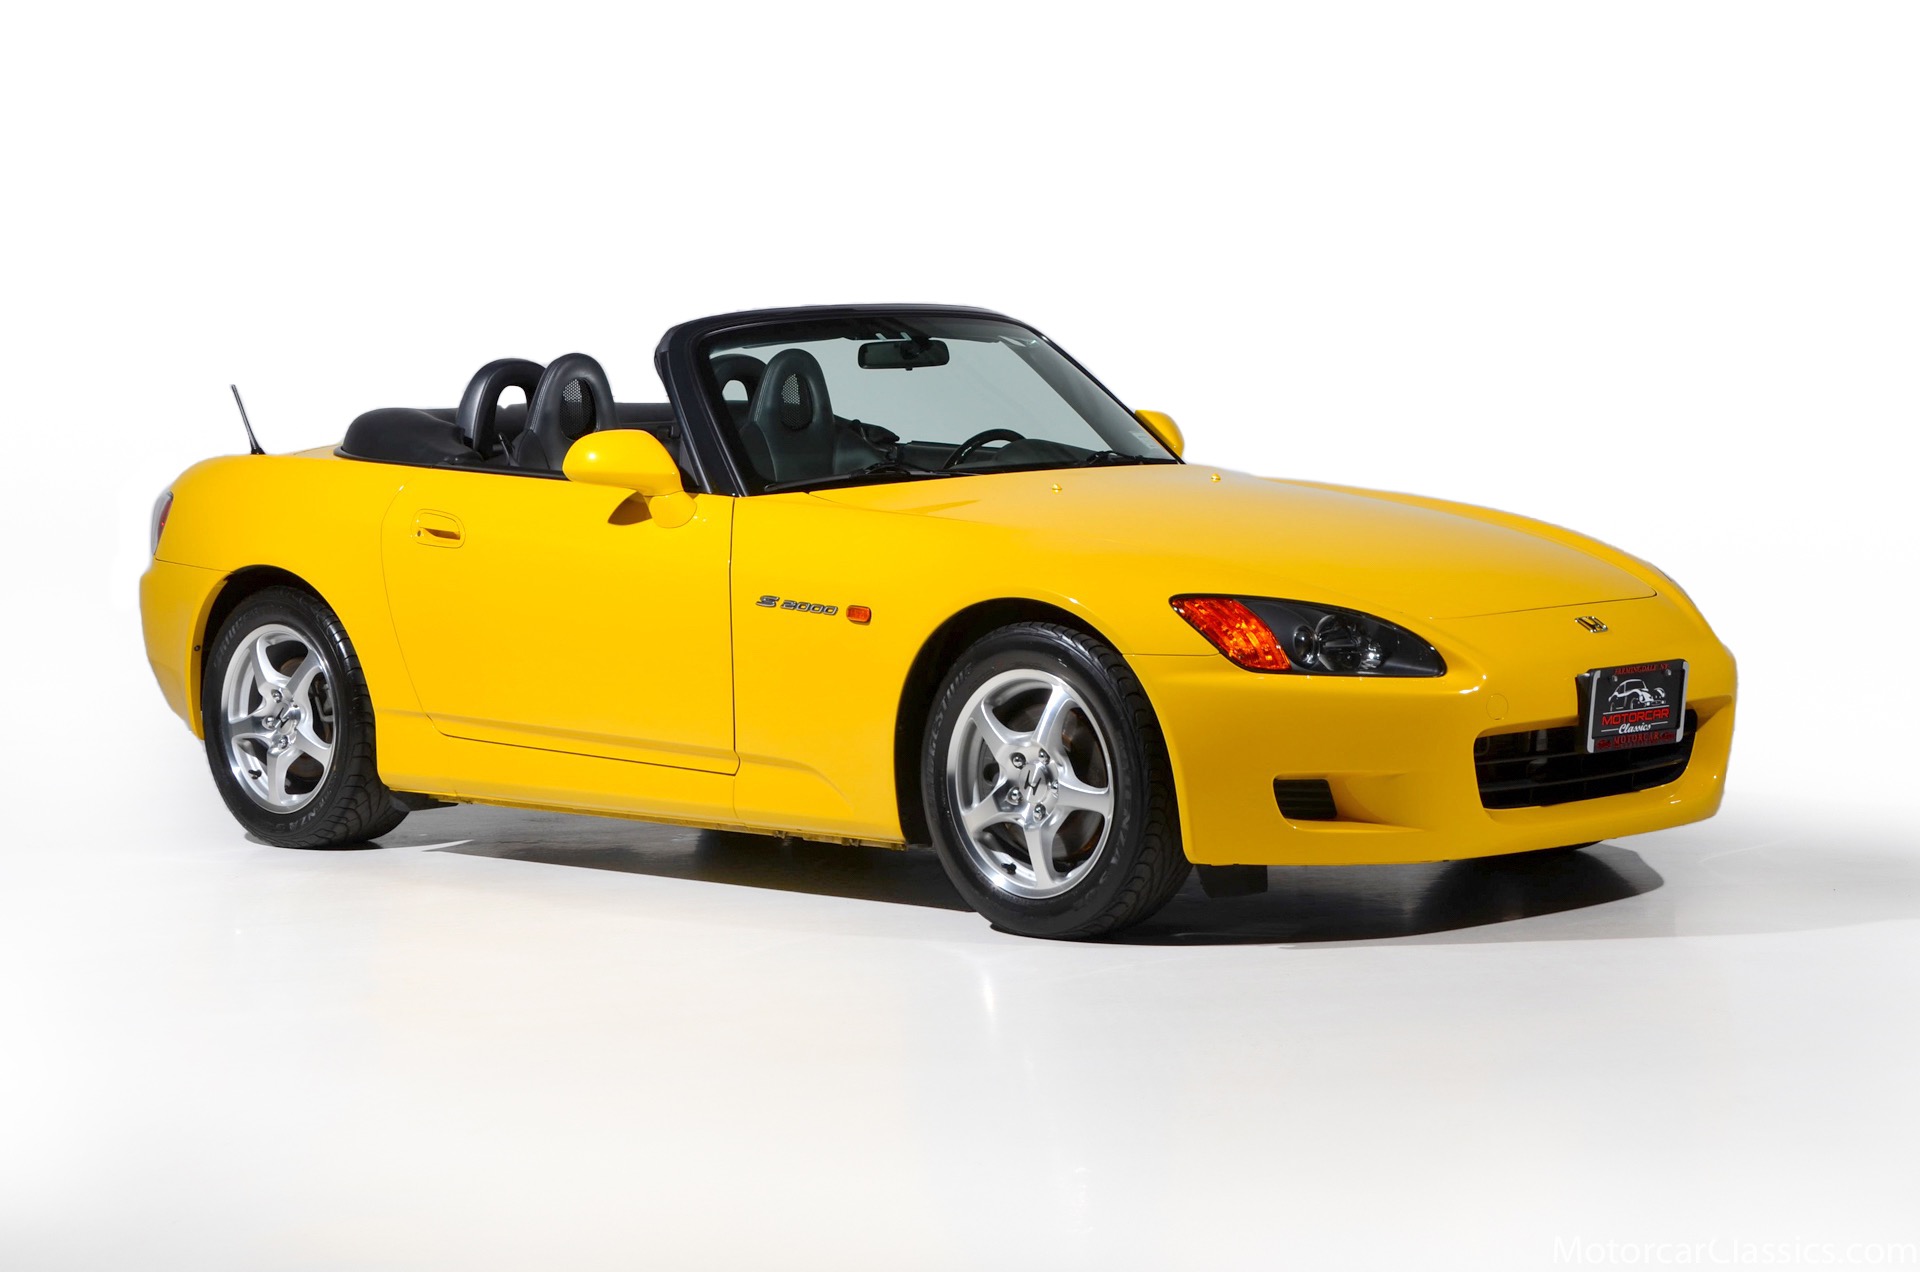 2001 Honda S2000 For Sale | Vintage Driving Machines